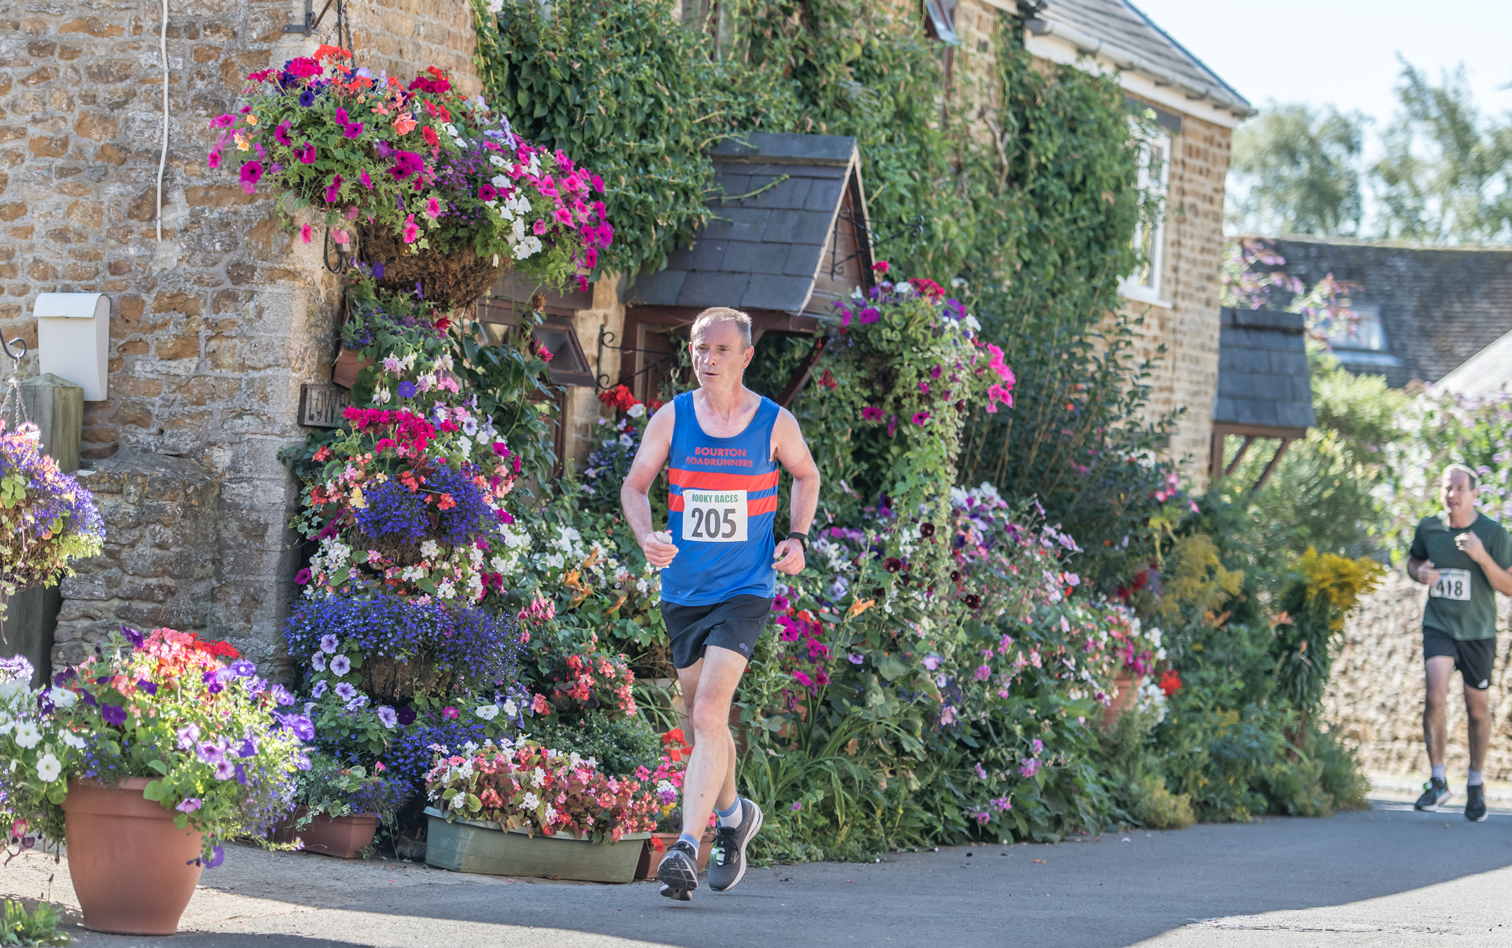 Bourton's Rob Williams at Hooky 6 miles - 7th August 2022